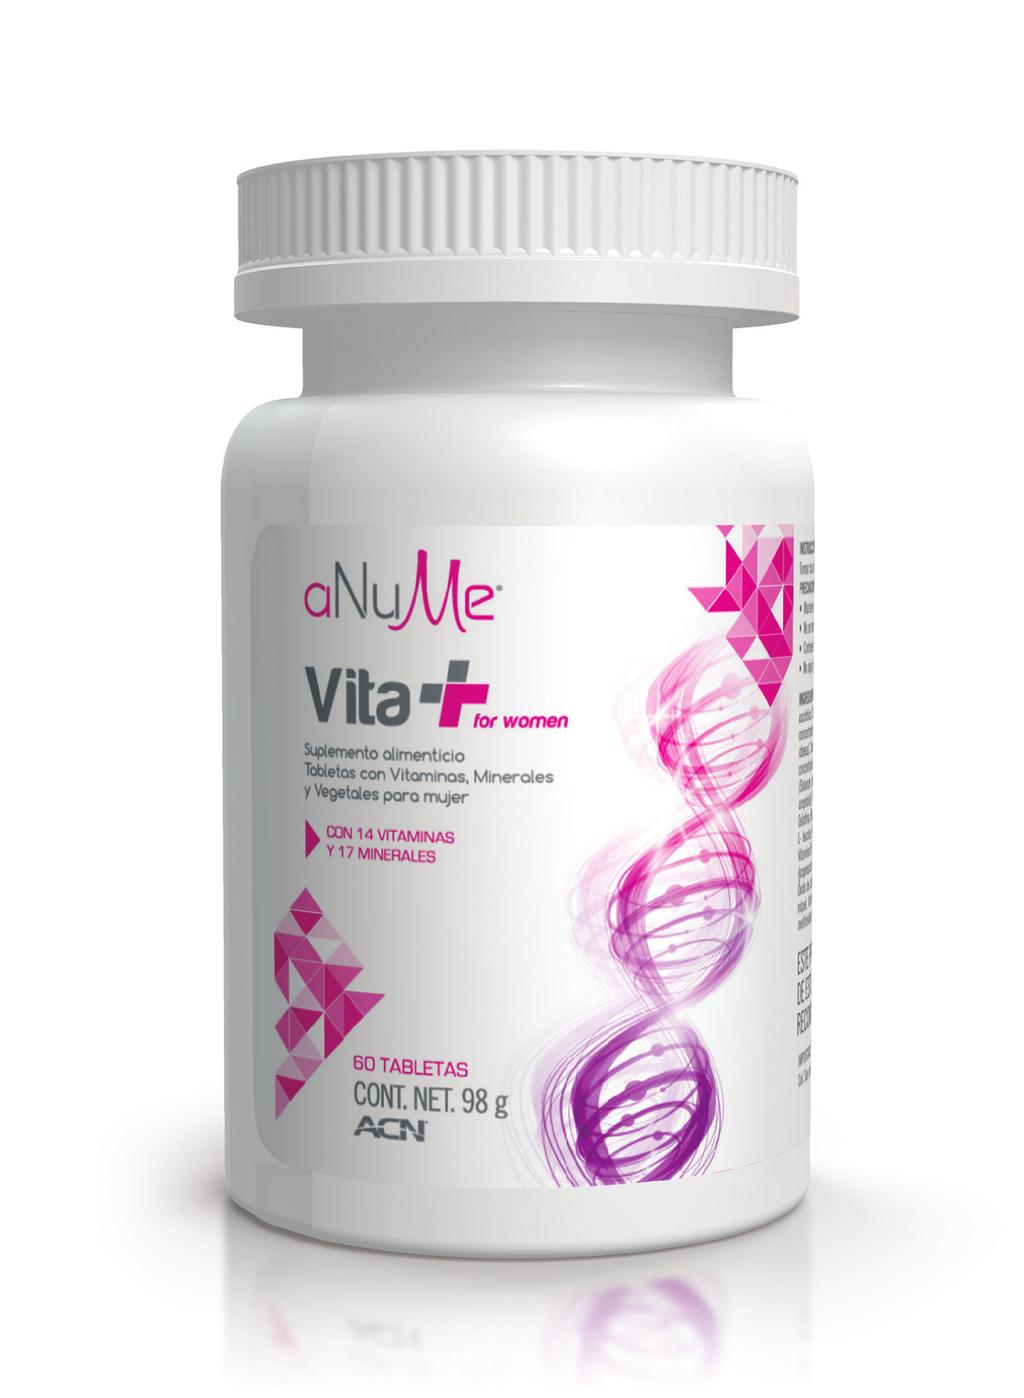 Vita+ provides support for overall foundational wellness, boosted by plant-derived nutrient powerhouses specifically beneficial in meeting the needs of the female body, such as Cranberry, Alfalfa,